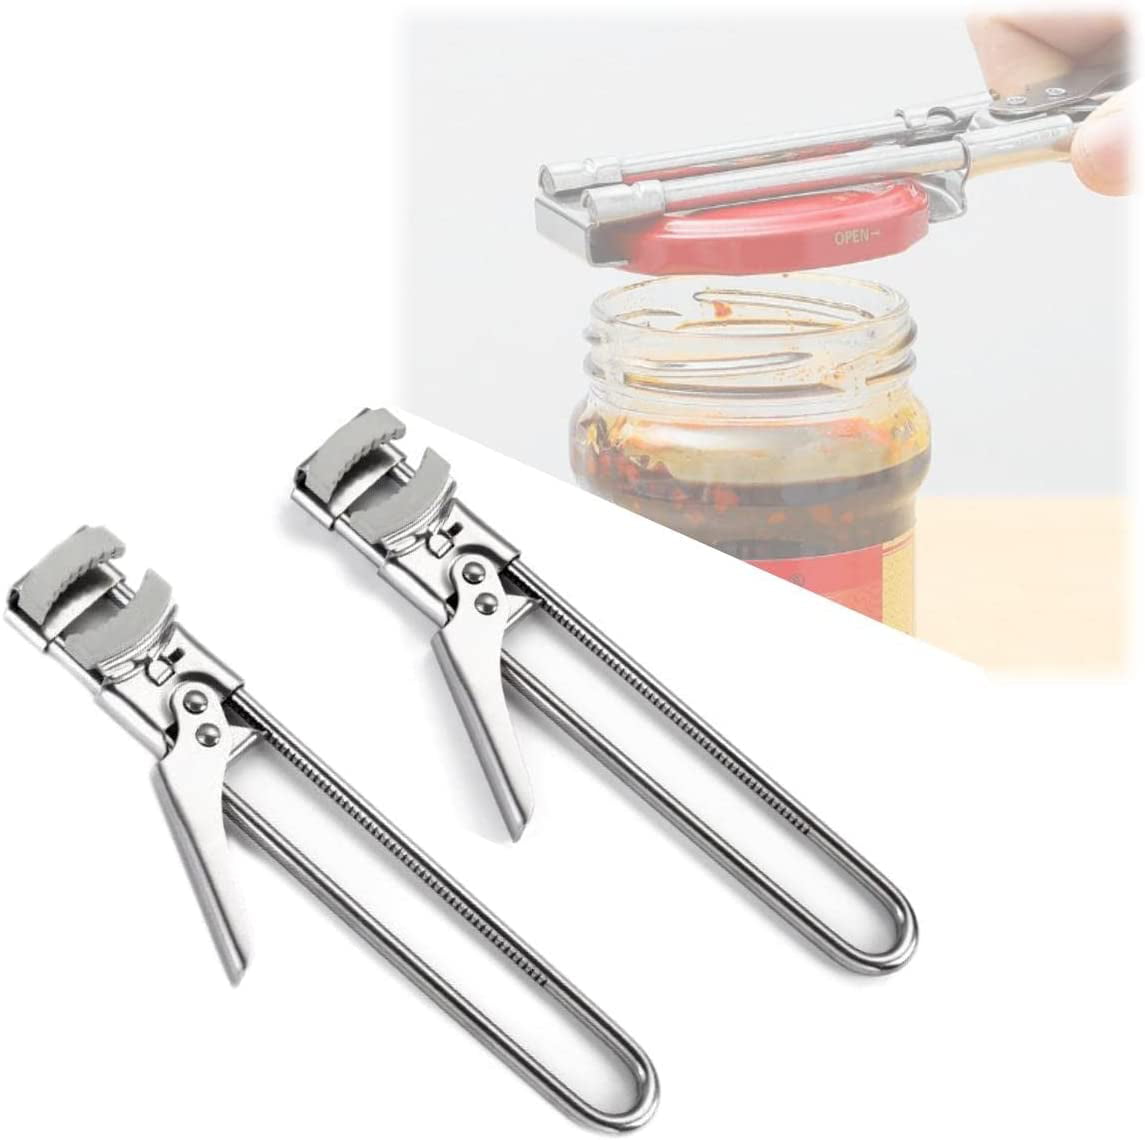 Adjustable Multifunctional Stainless Steel Can Opener，adjustable Stainless  Steel Can Opener，fullofcarts Jar Opener for Weak Handsfor Any-size Lids  (2pcs, 7.7in) 